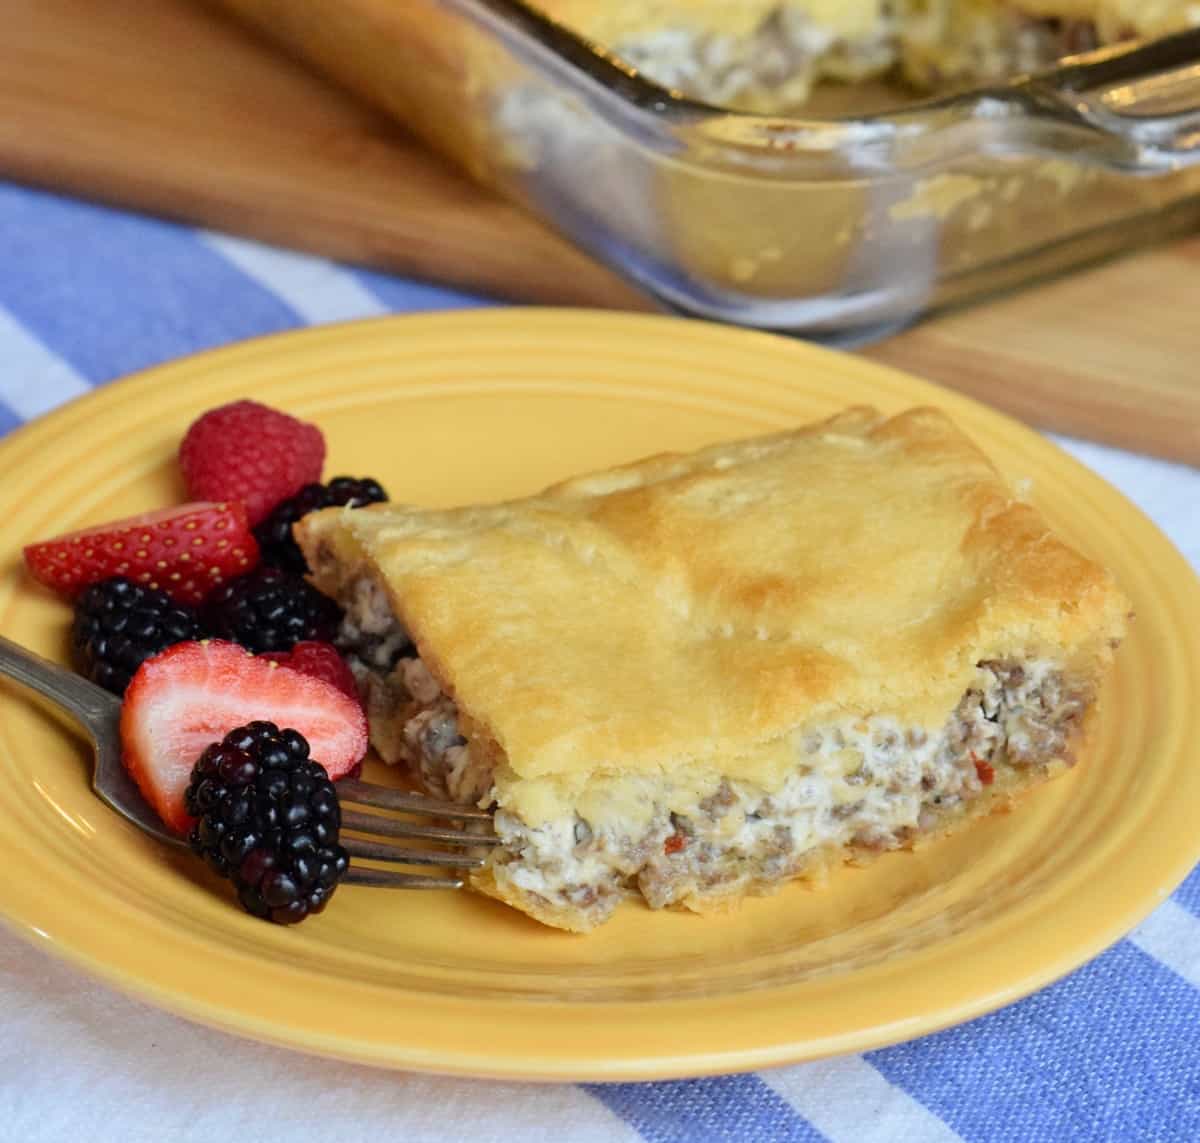 Sausage cream cheese casserole square with fork and fruit on yellow plate.